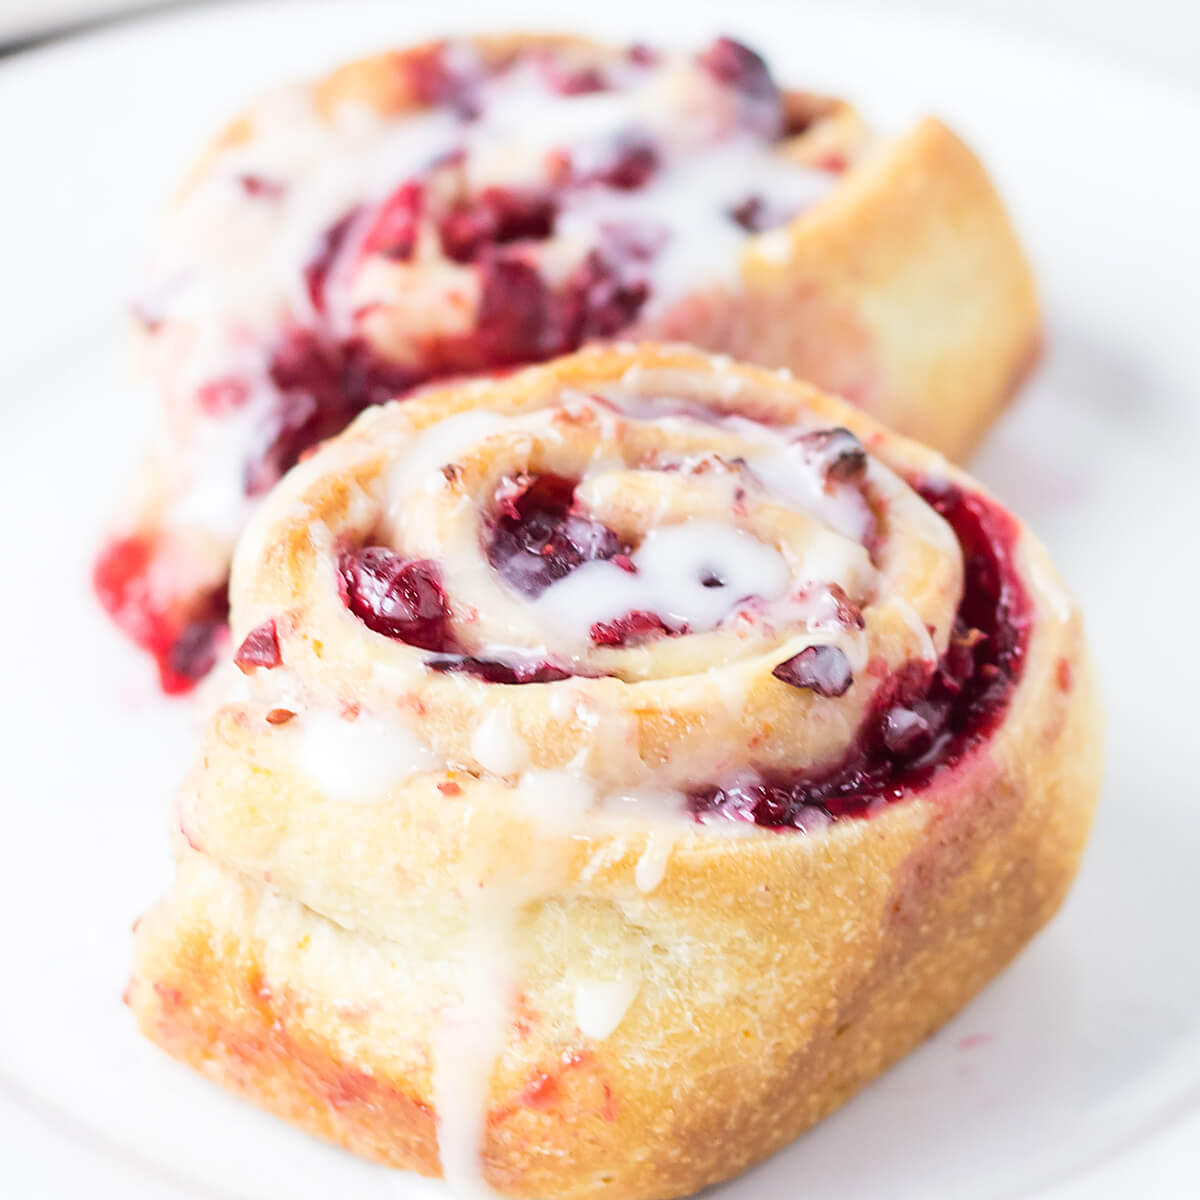 Finished cranberry orange sweet rolls with sugar glaze on a white serving plate.